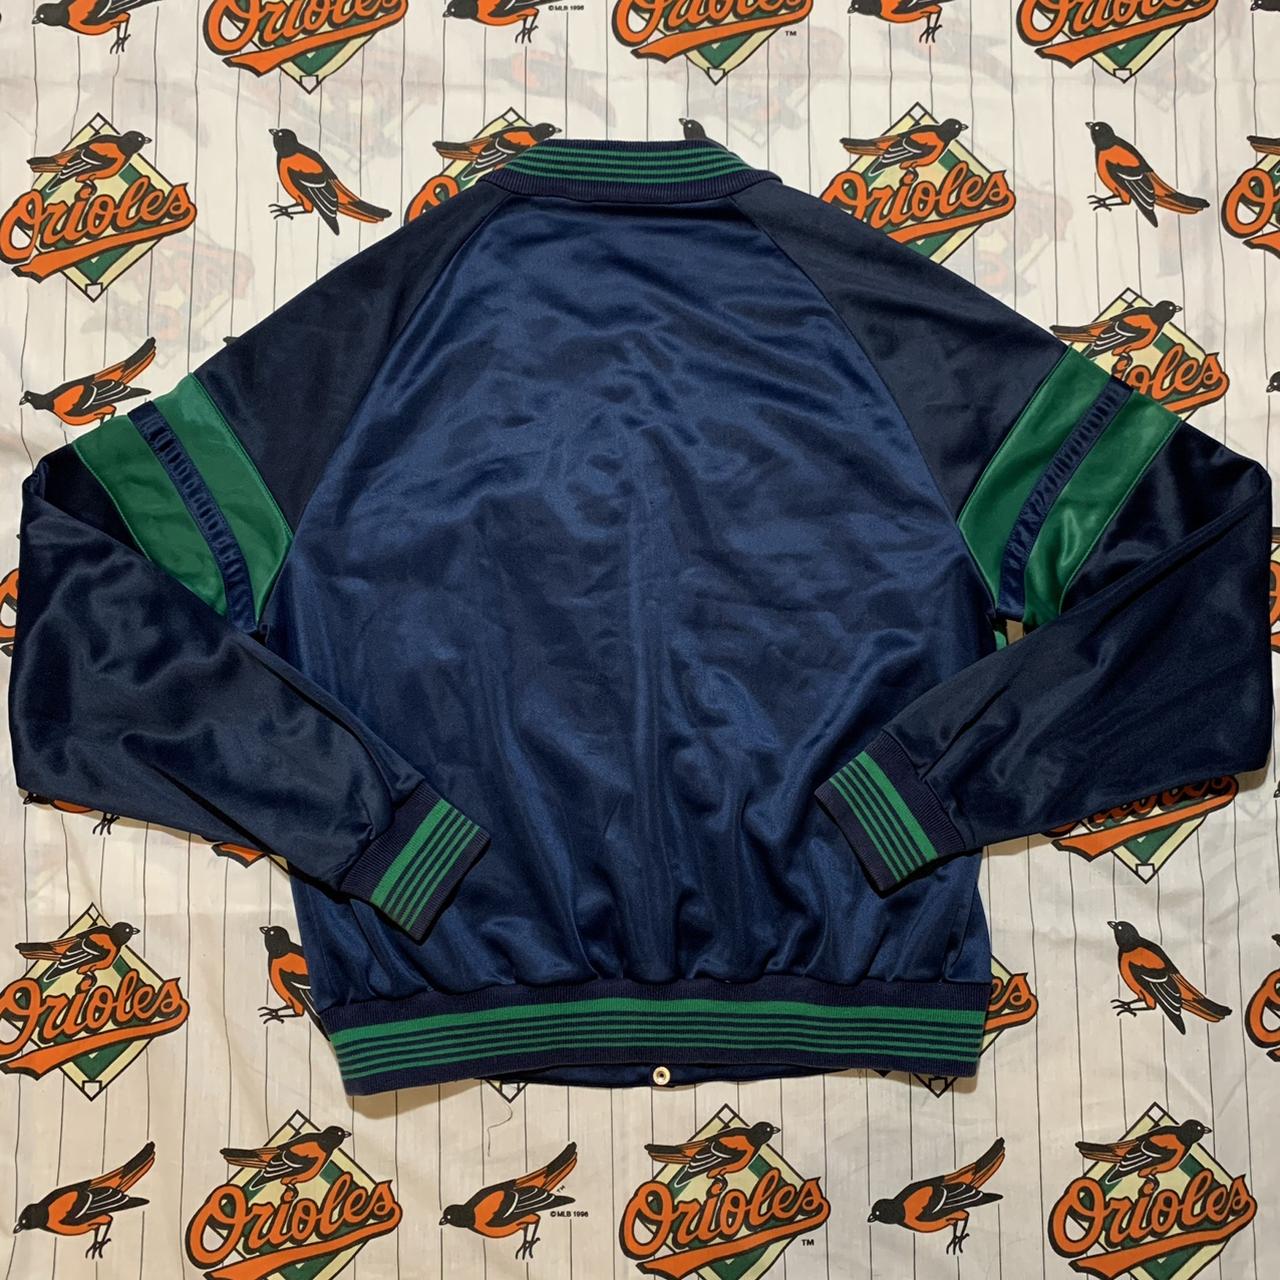 Prince Men's Blue and Green Jacket (3)